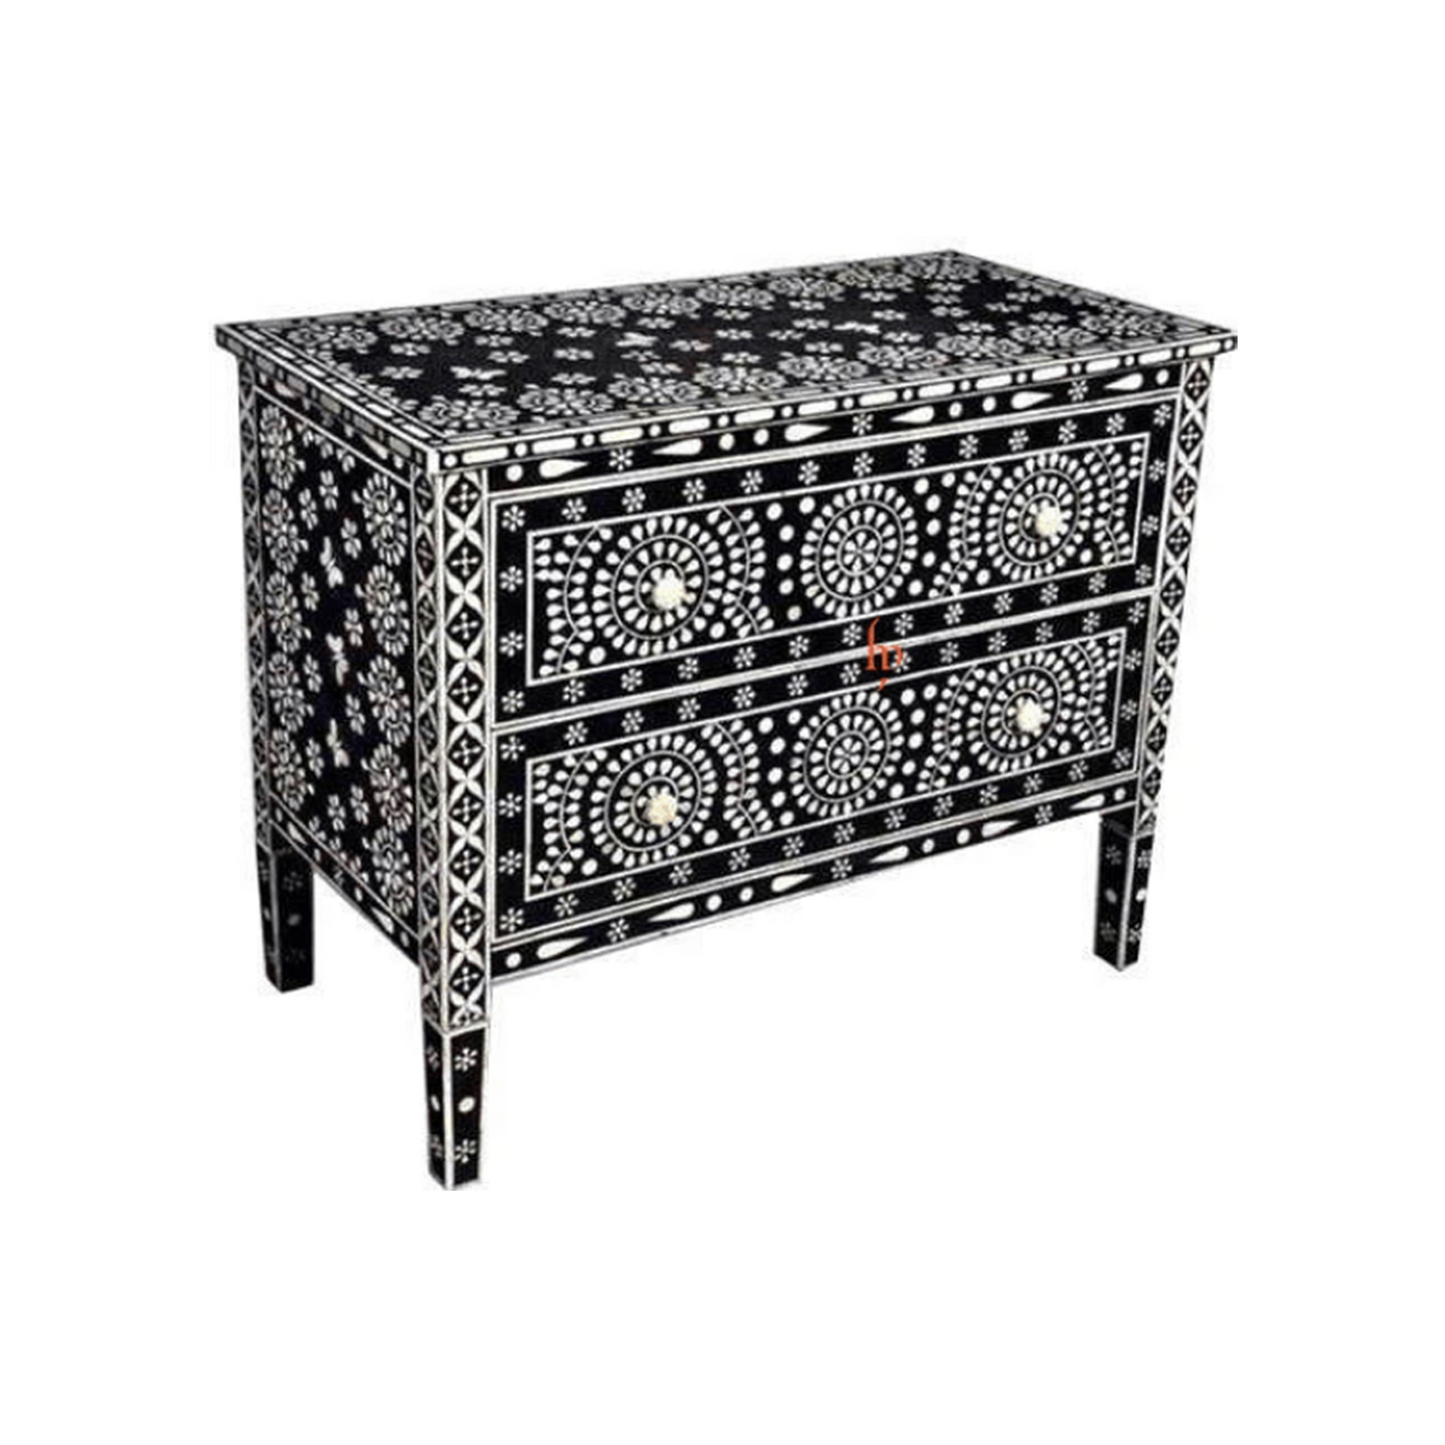 Bone Inlay Chest Of 2 Drawers Beautifully Crafted in Black Color Floral Design Home Decor Handmade Inlay Furniture